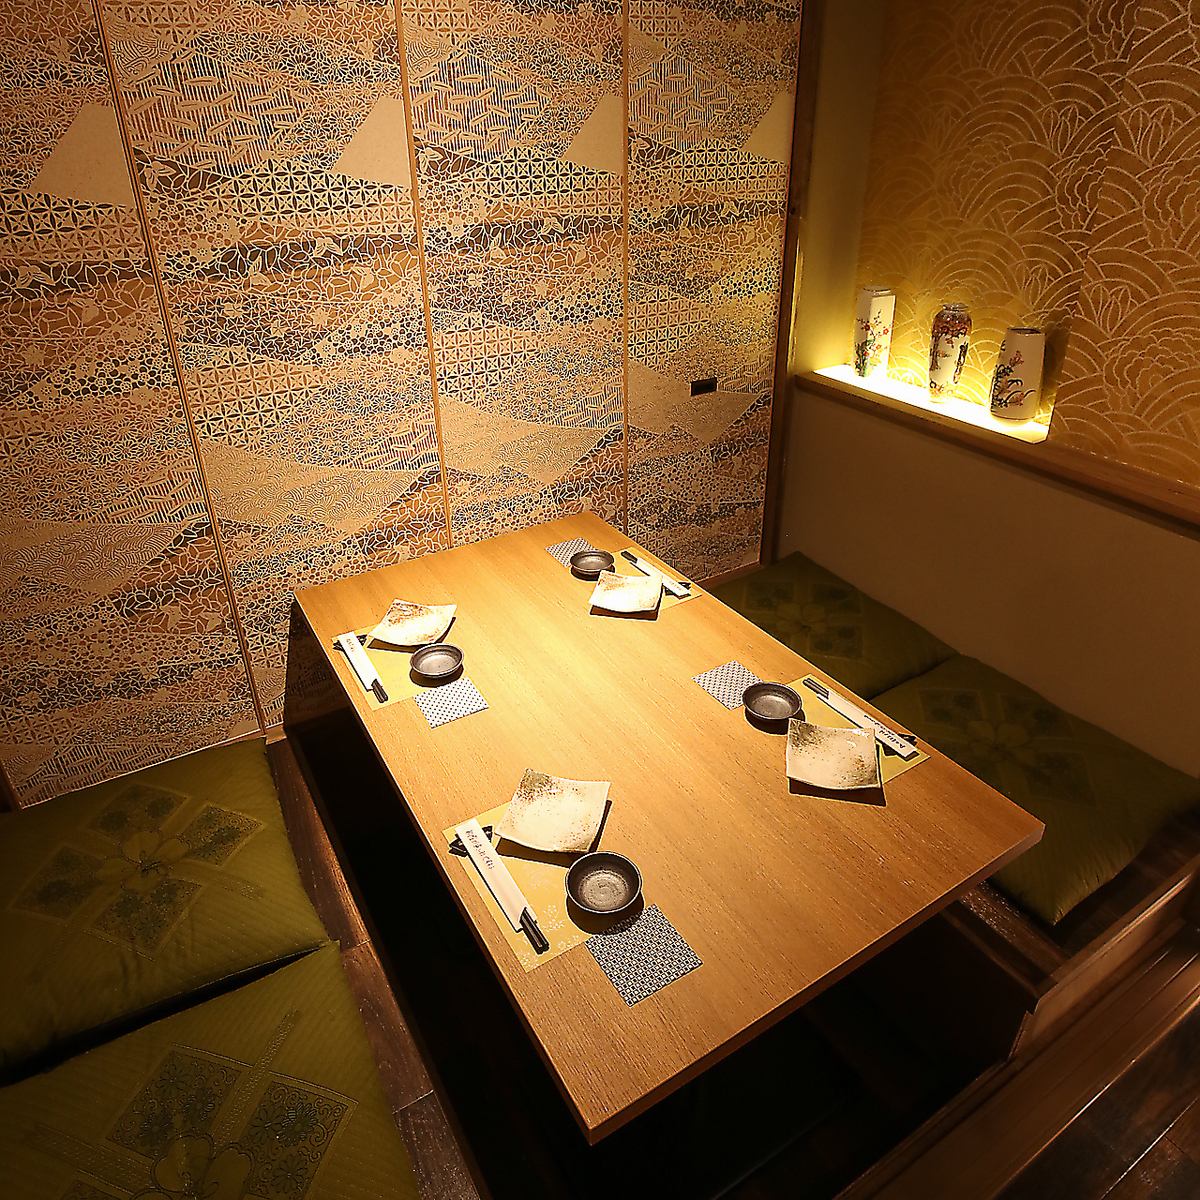 You can enjoy your meal in a private room with a calm atmosphere.